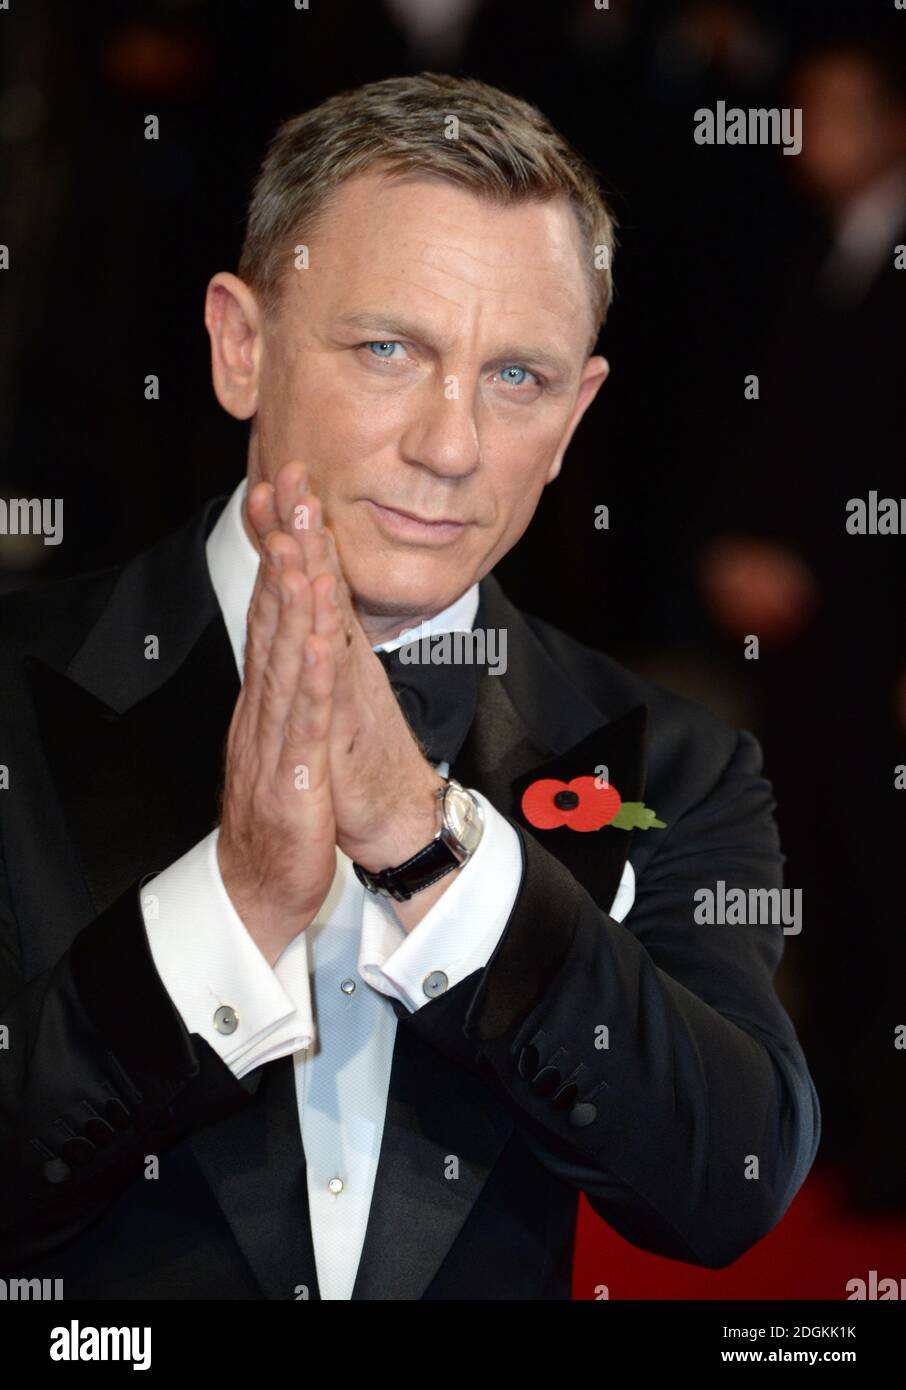 Daniel Craig attending the World Premiere of Spectre, held at the Royal ...